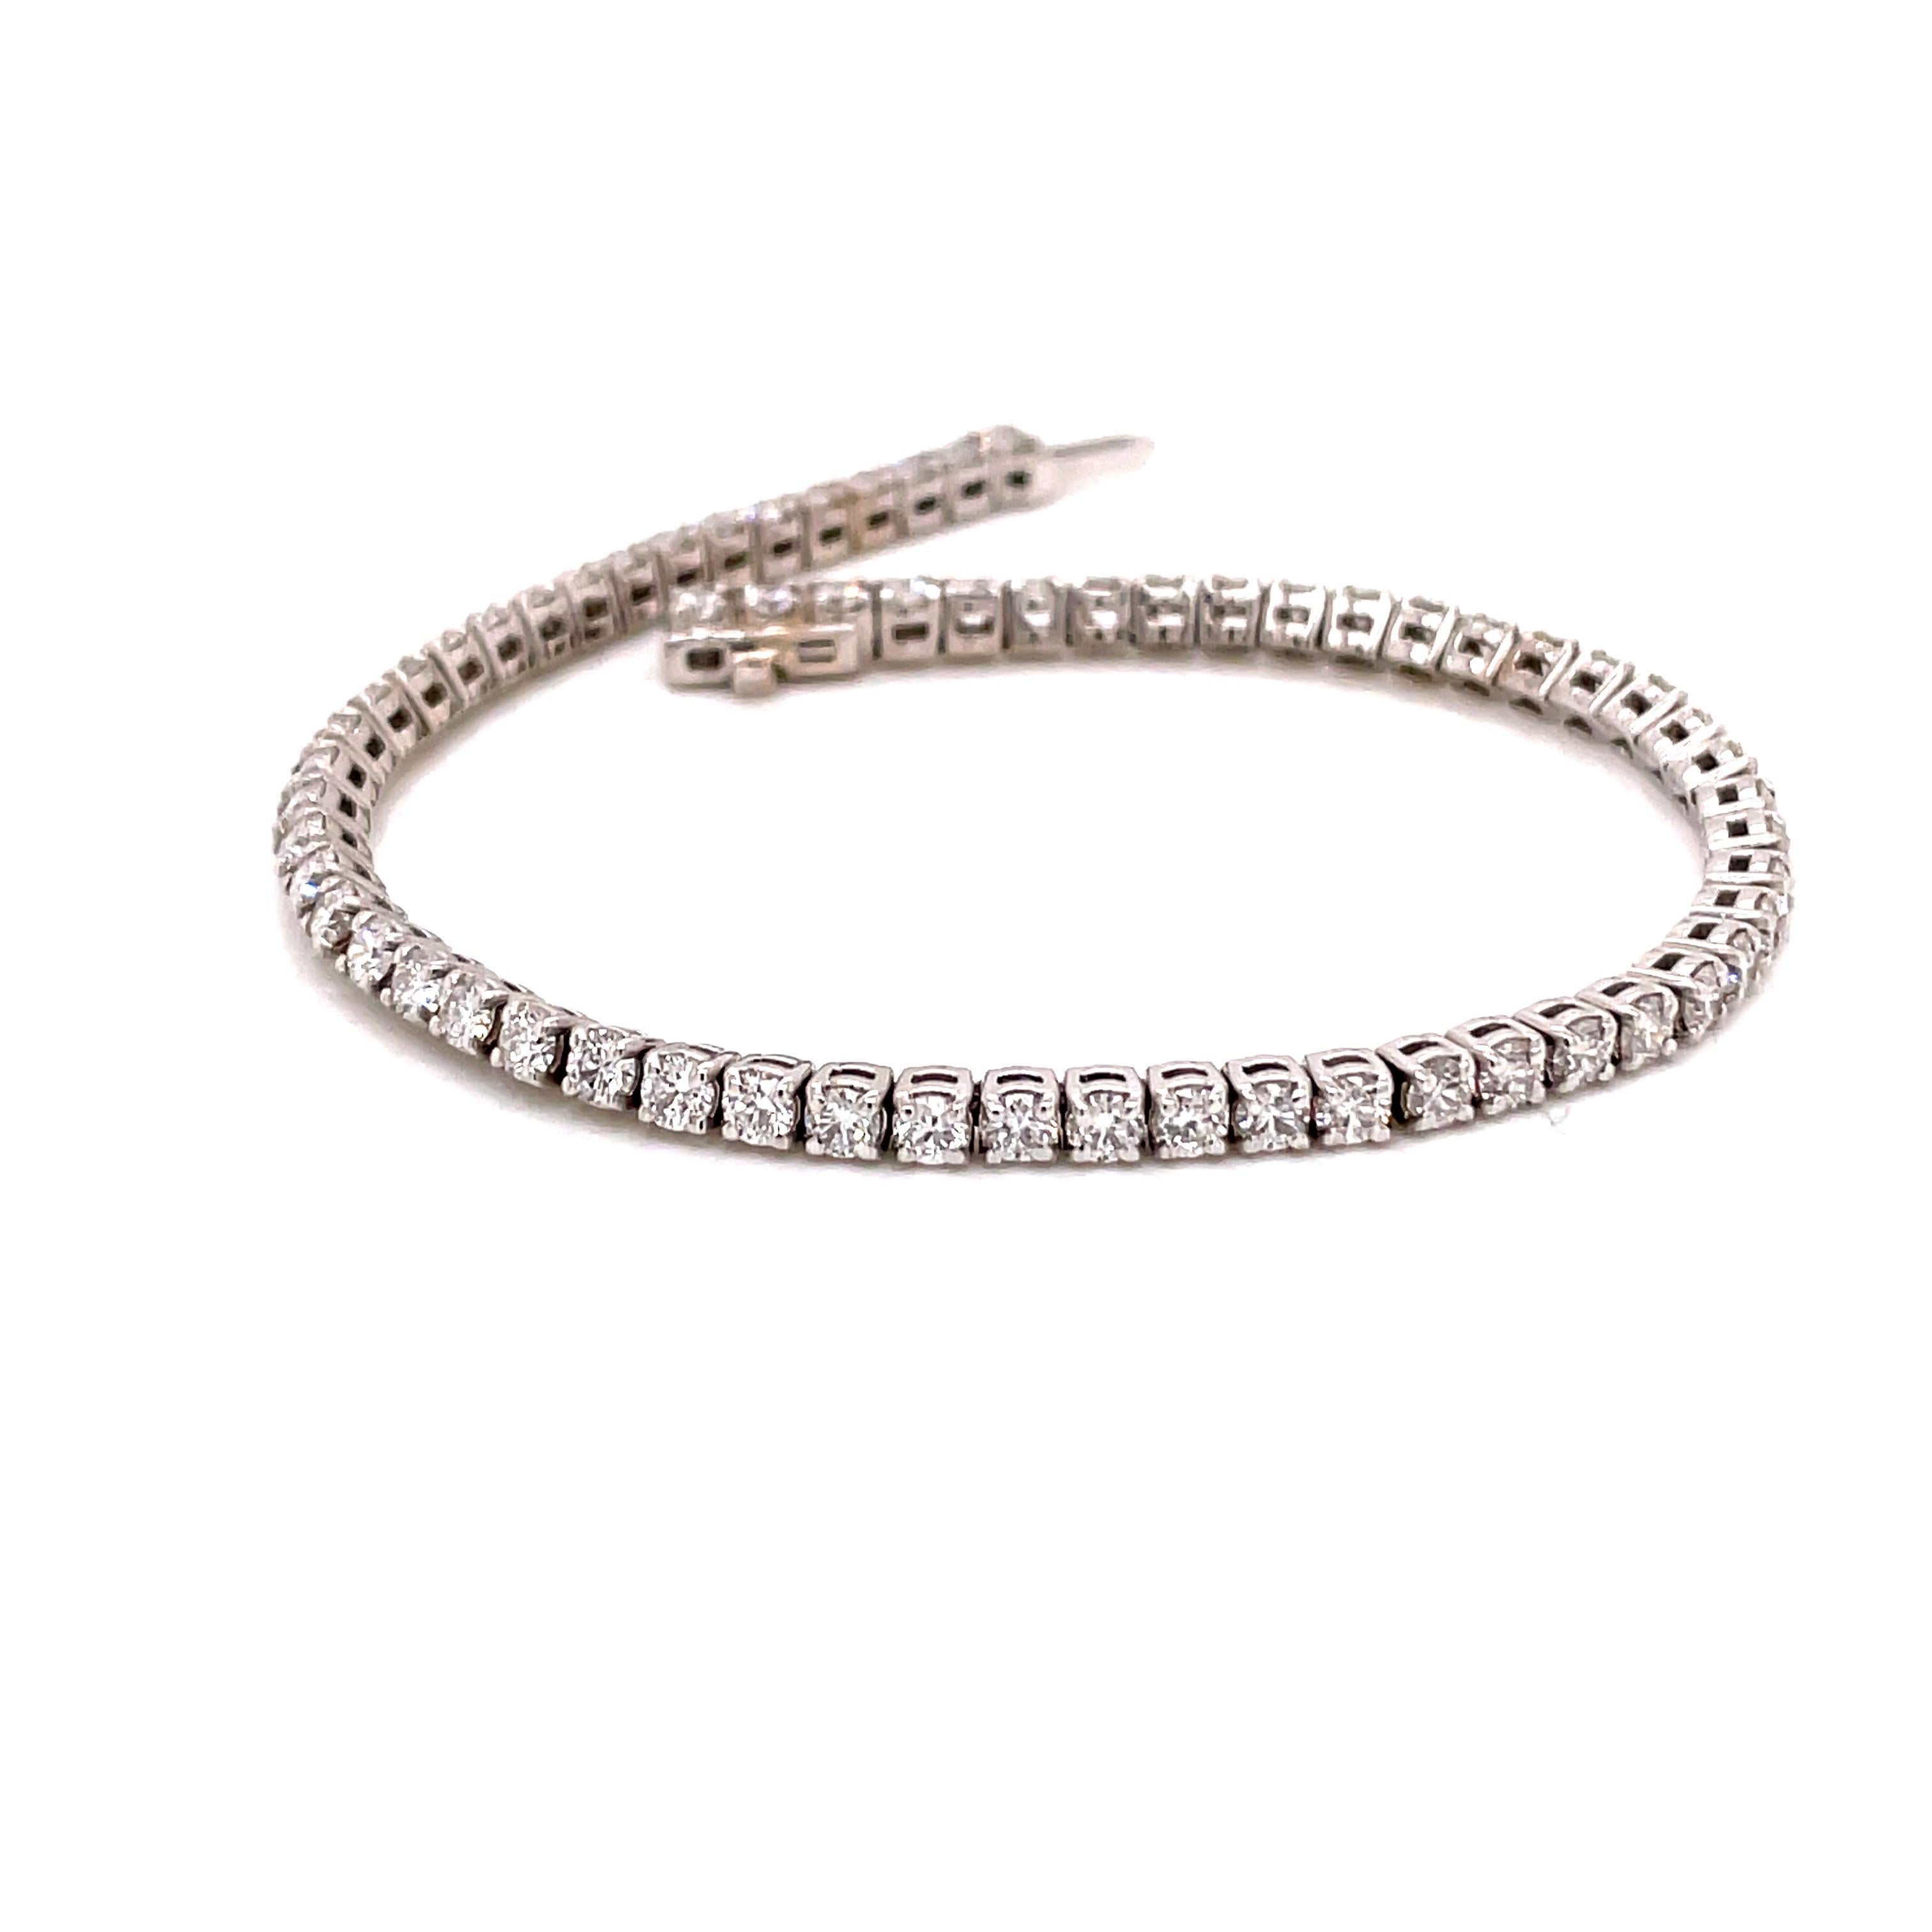 Chris Evert launches new 'tennis bracelet' collection to celebrate 44th  anniversary of her bracelet incident at US Open